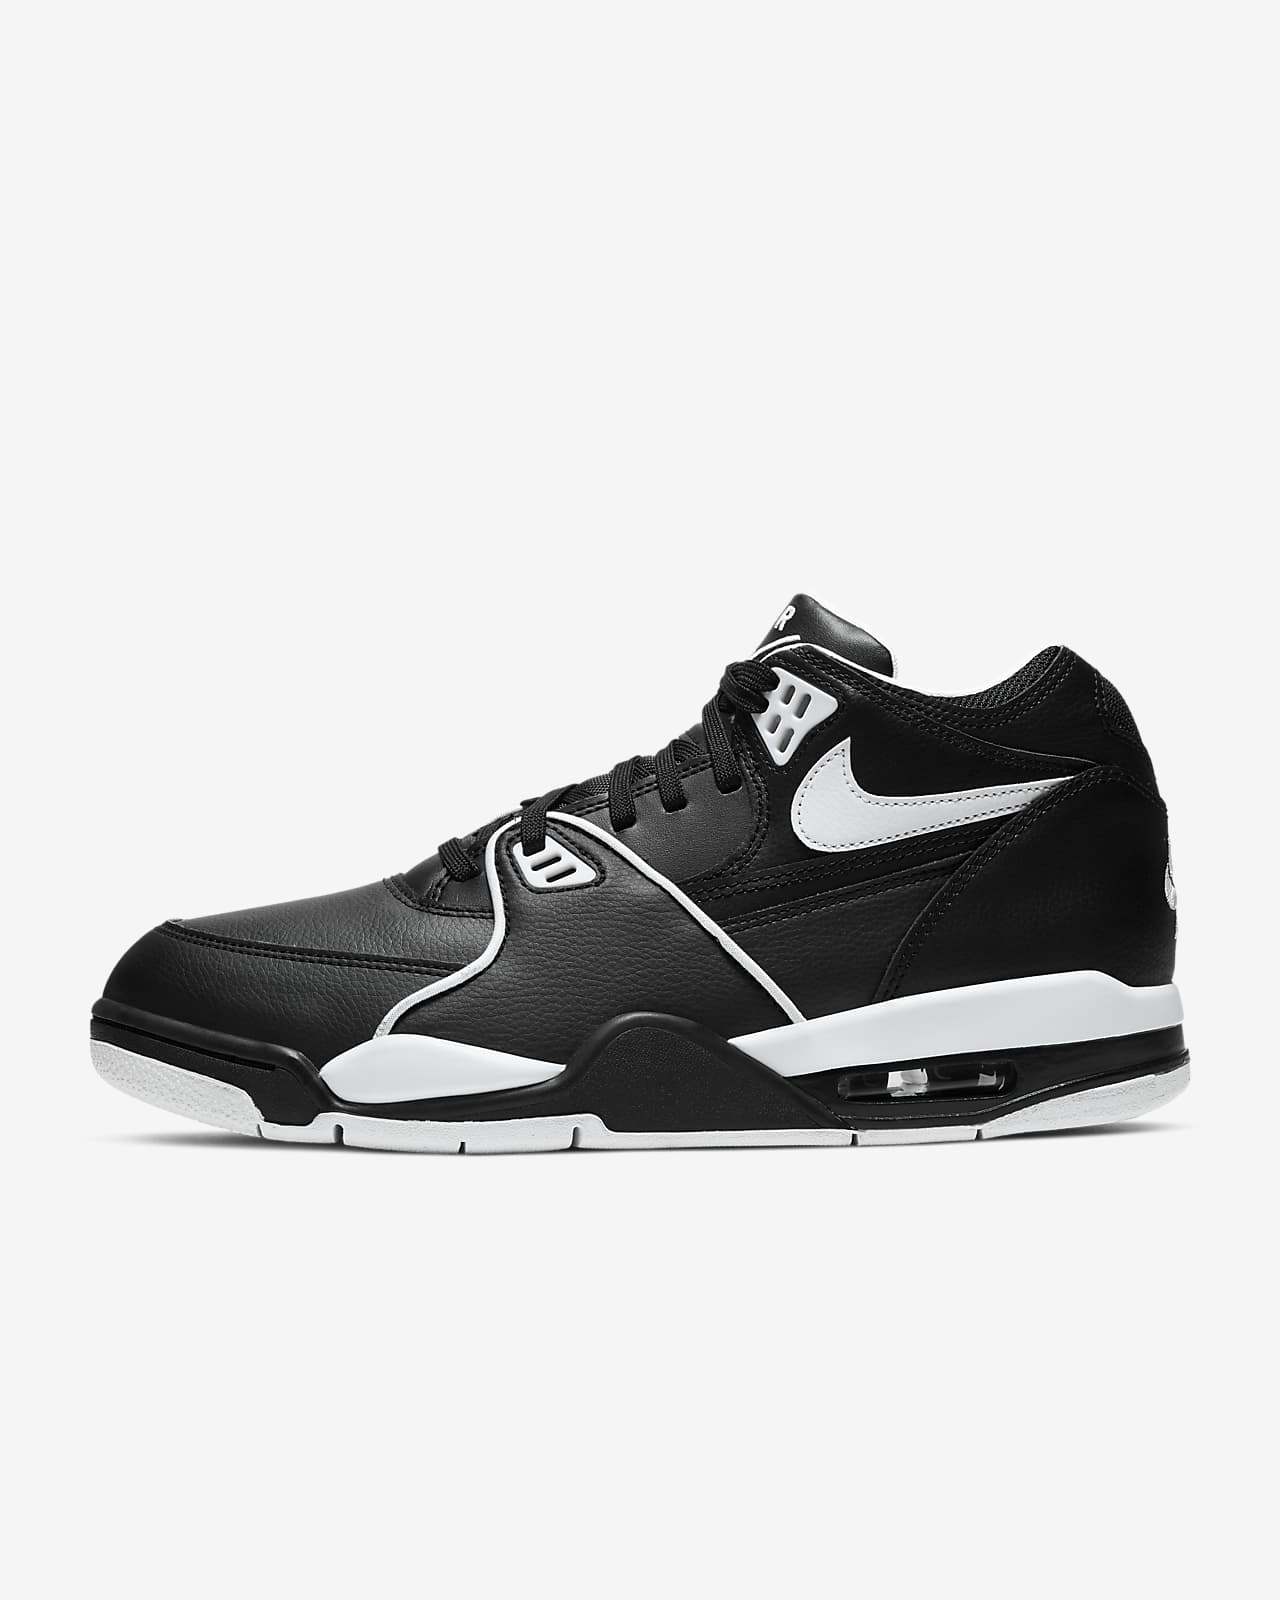 Chaussures Nike Air Flight 89 pour Homme